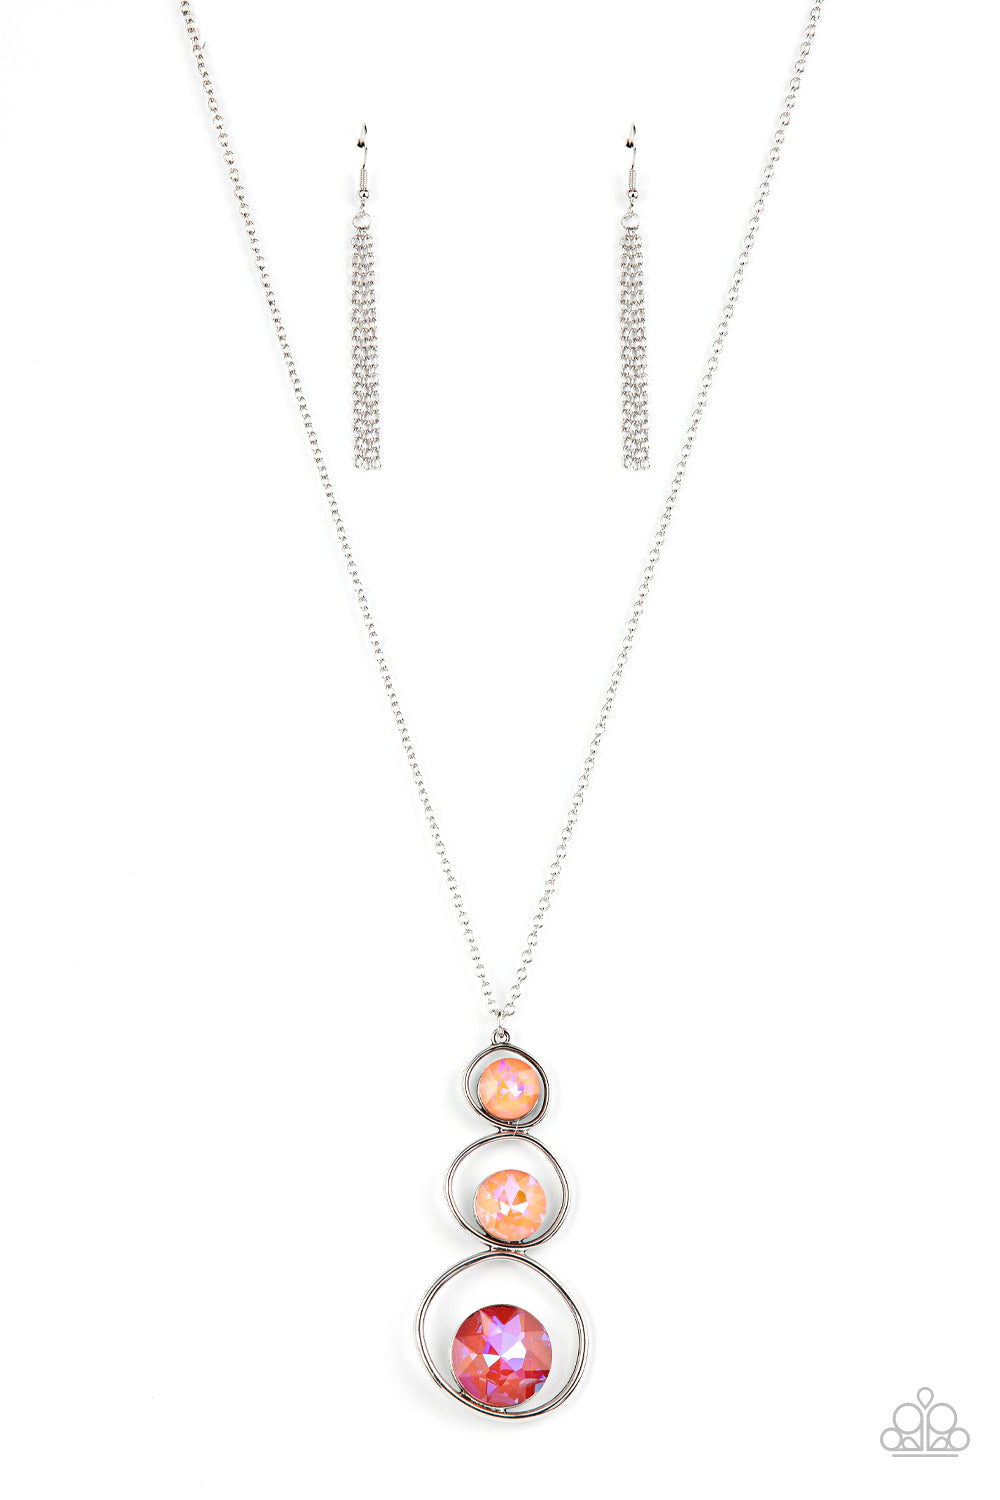 Celestial Courtier Necklace (Green, Orange, Yellow)